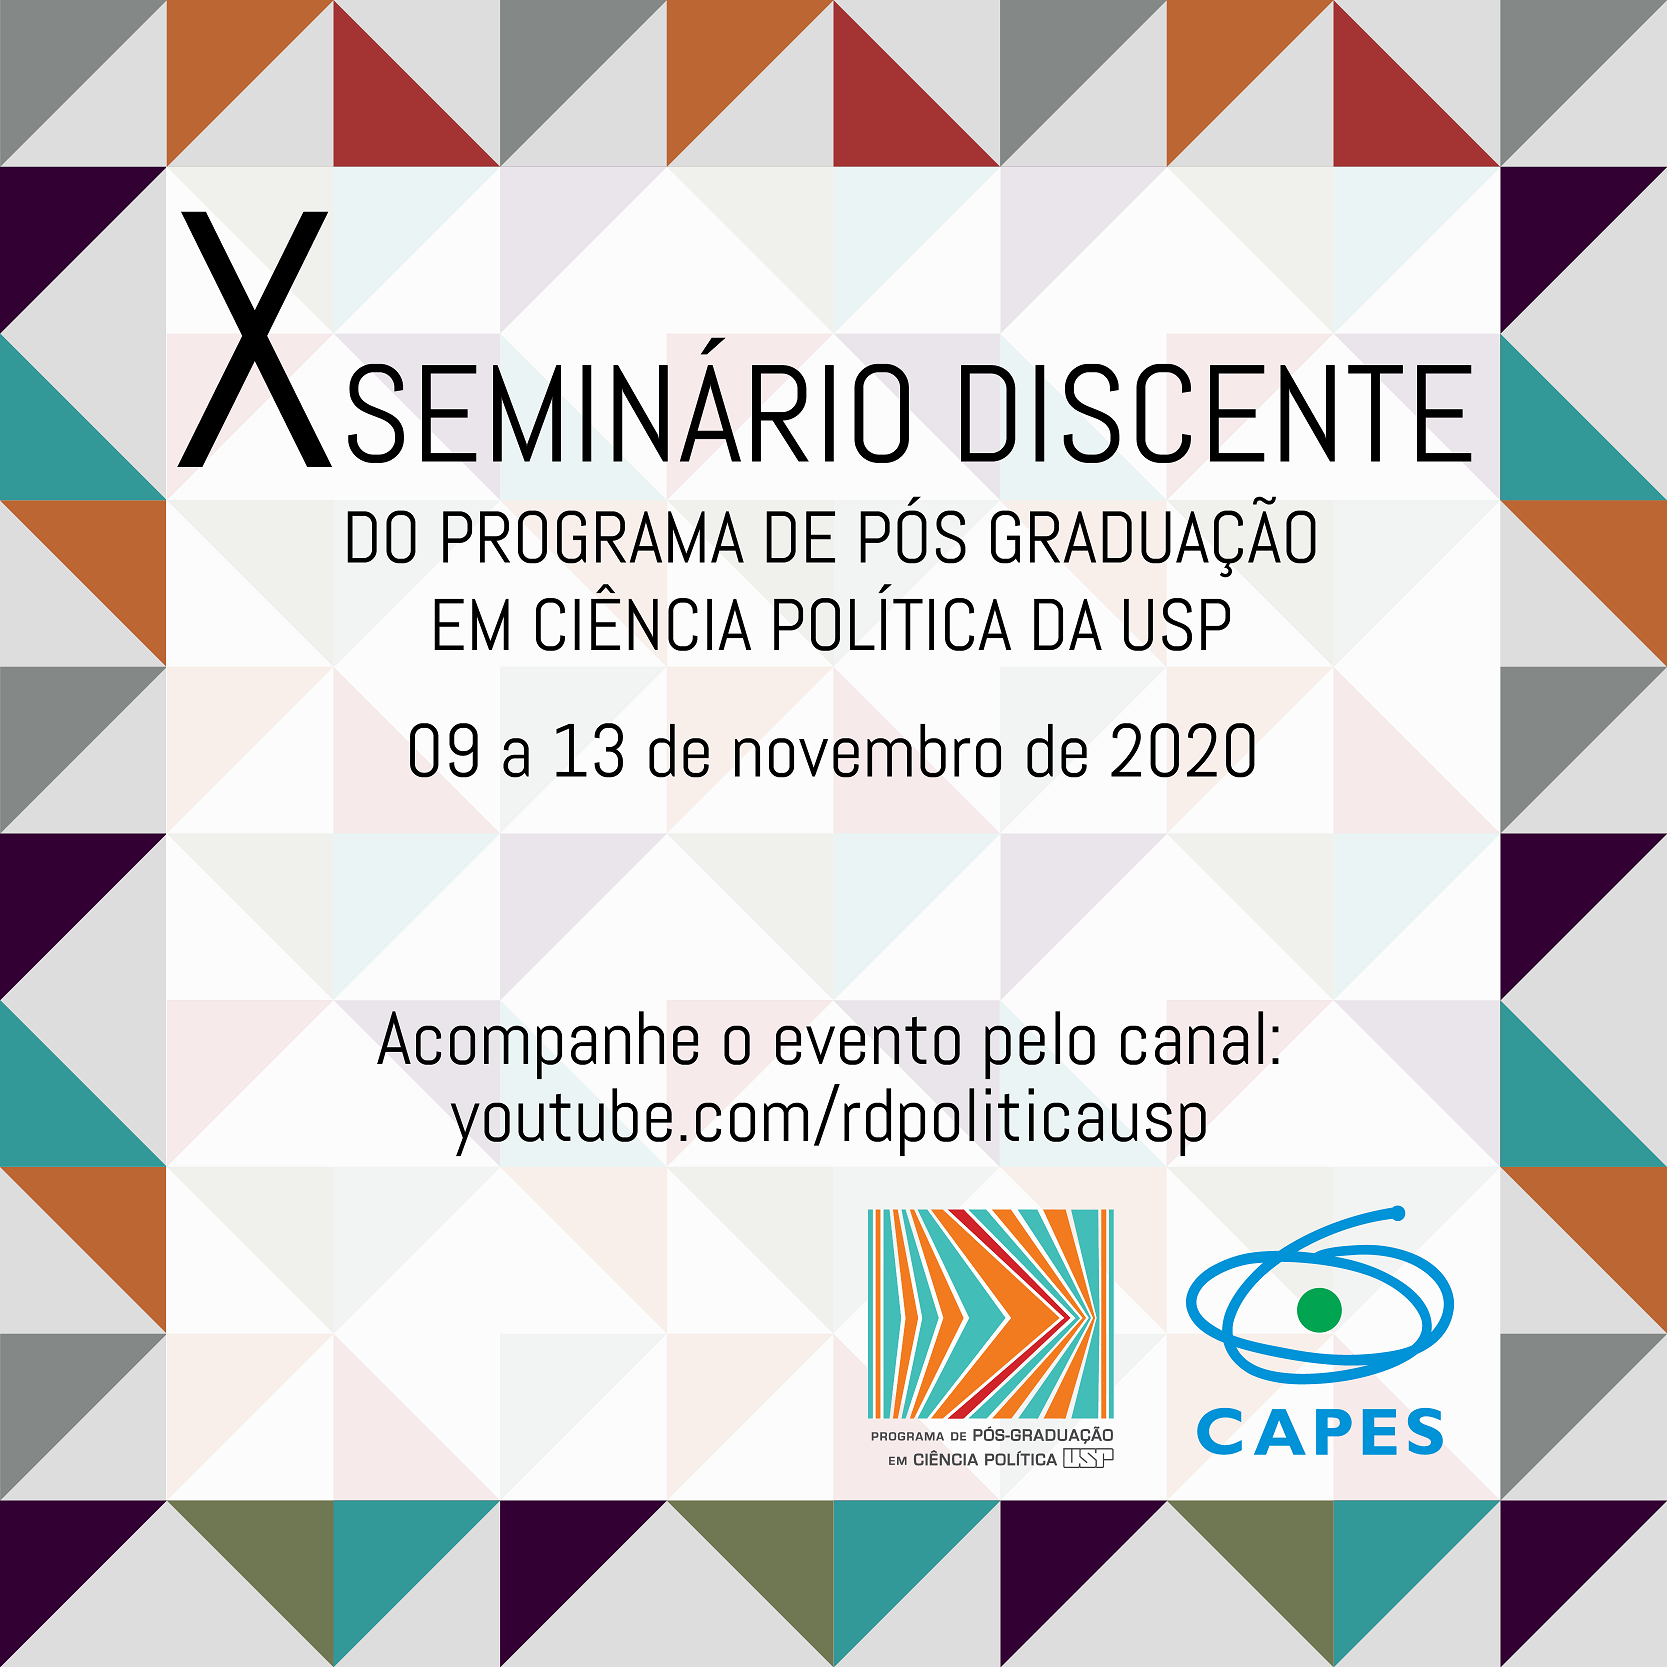 The image is formed by the logotype ofthe event, comprised of a series of triangles in a pastel color scheme, and a blank rectangle in the center, with information concerning the event. The information is: the event title, the week it will be held in - 09-13th november, 2020-, a text in portuguese that translates to "Follow the event in the channel: youtube.com/rdpoliticausp", and the logotype of the funding bodies: CAPES and the Political Science Department of the University of São Paulo